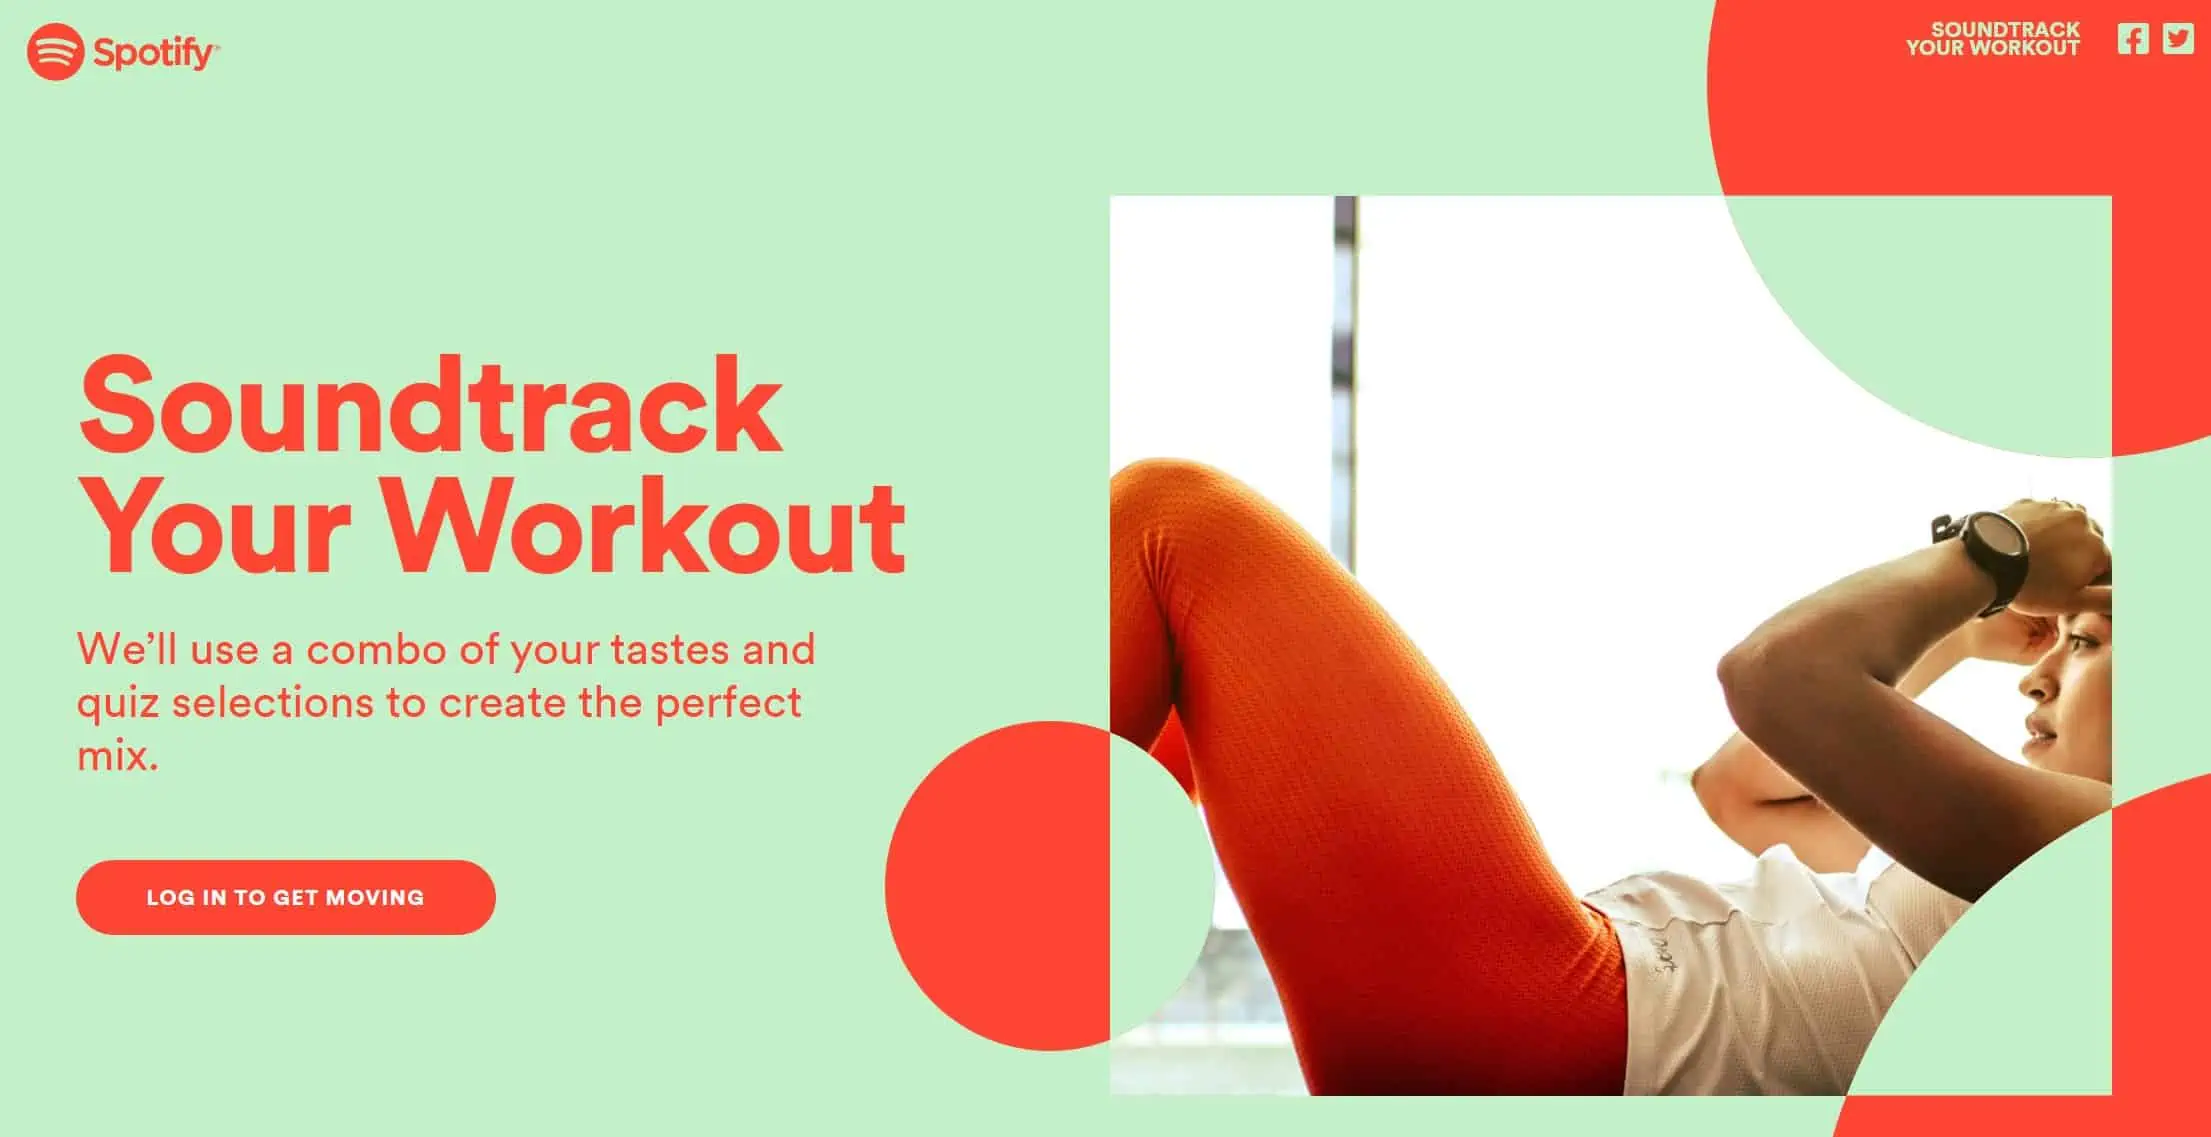 Spotify’s new ‘Soundtrack Your Workout’ feature will now make you a custom workout playlist